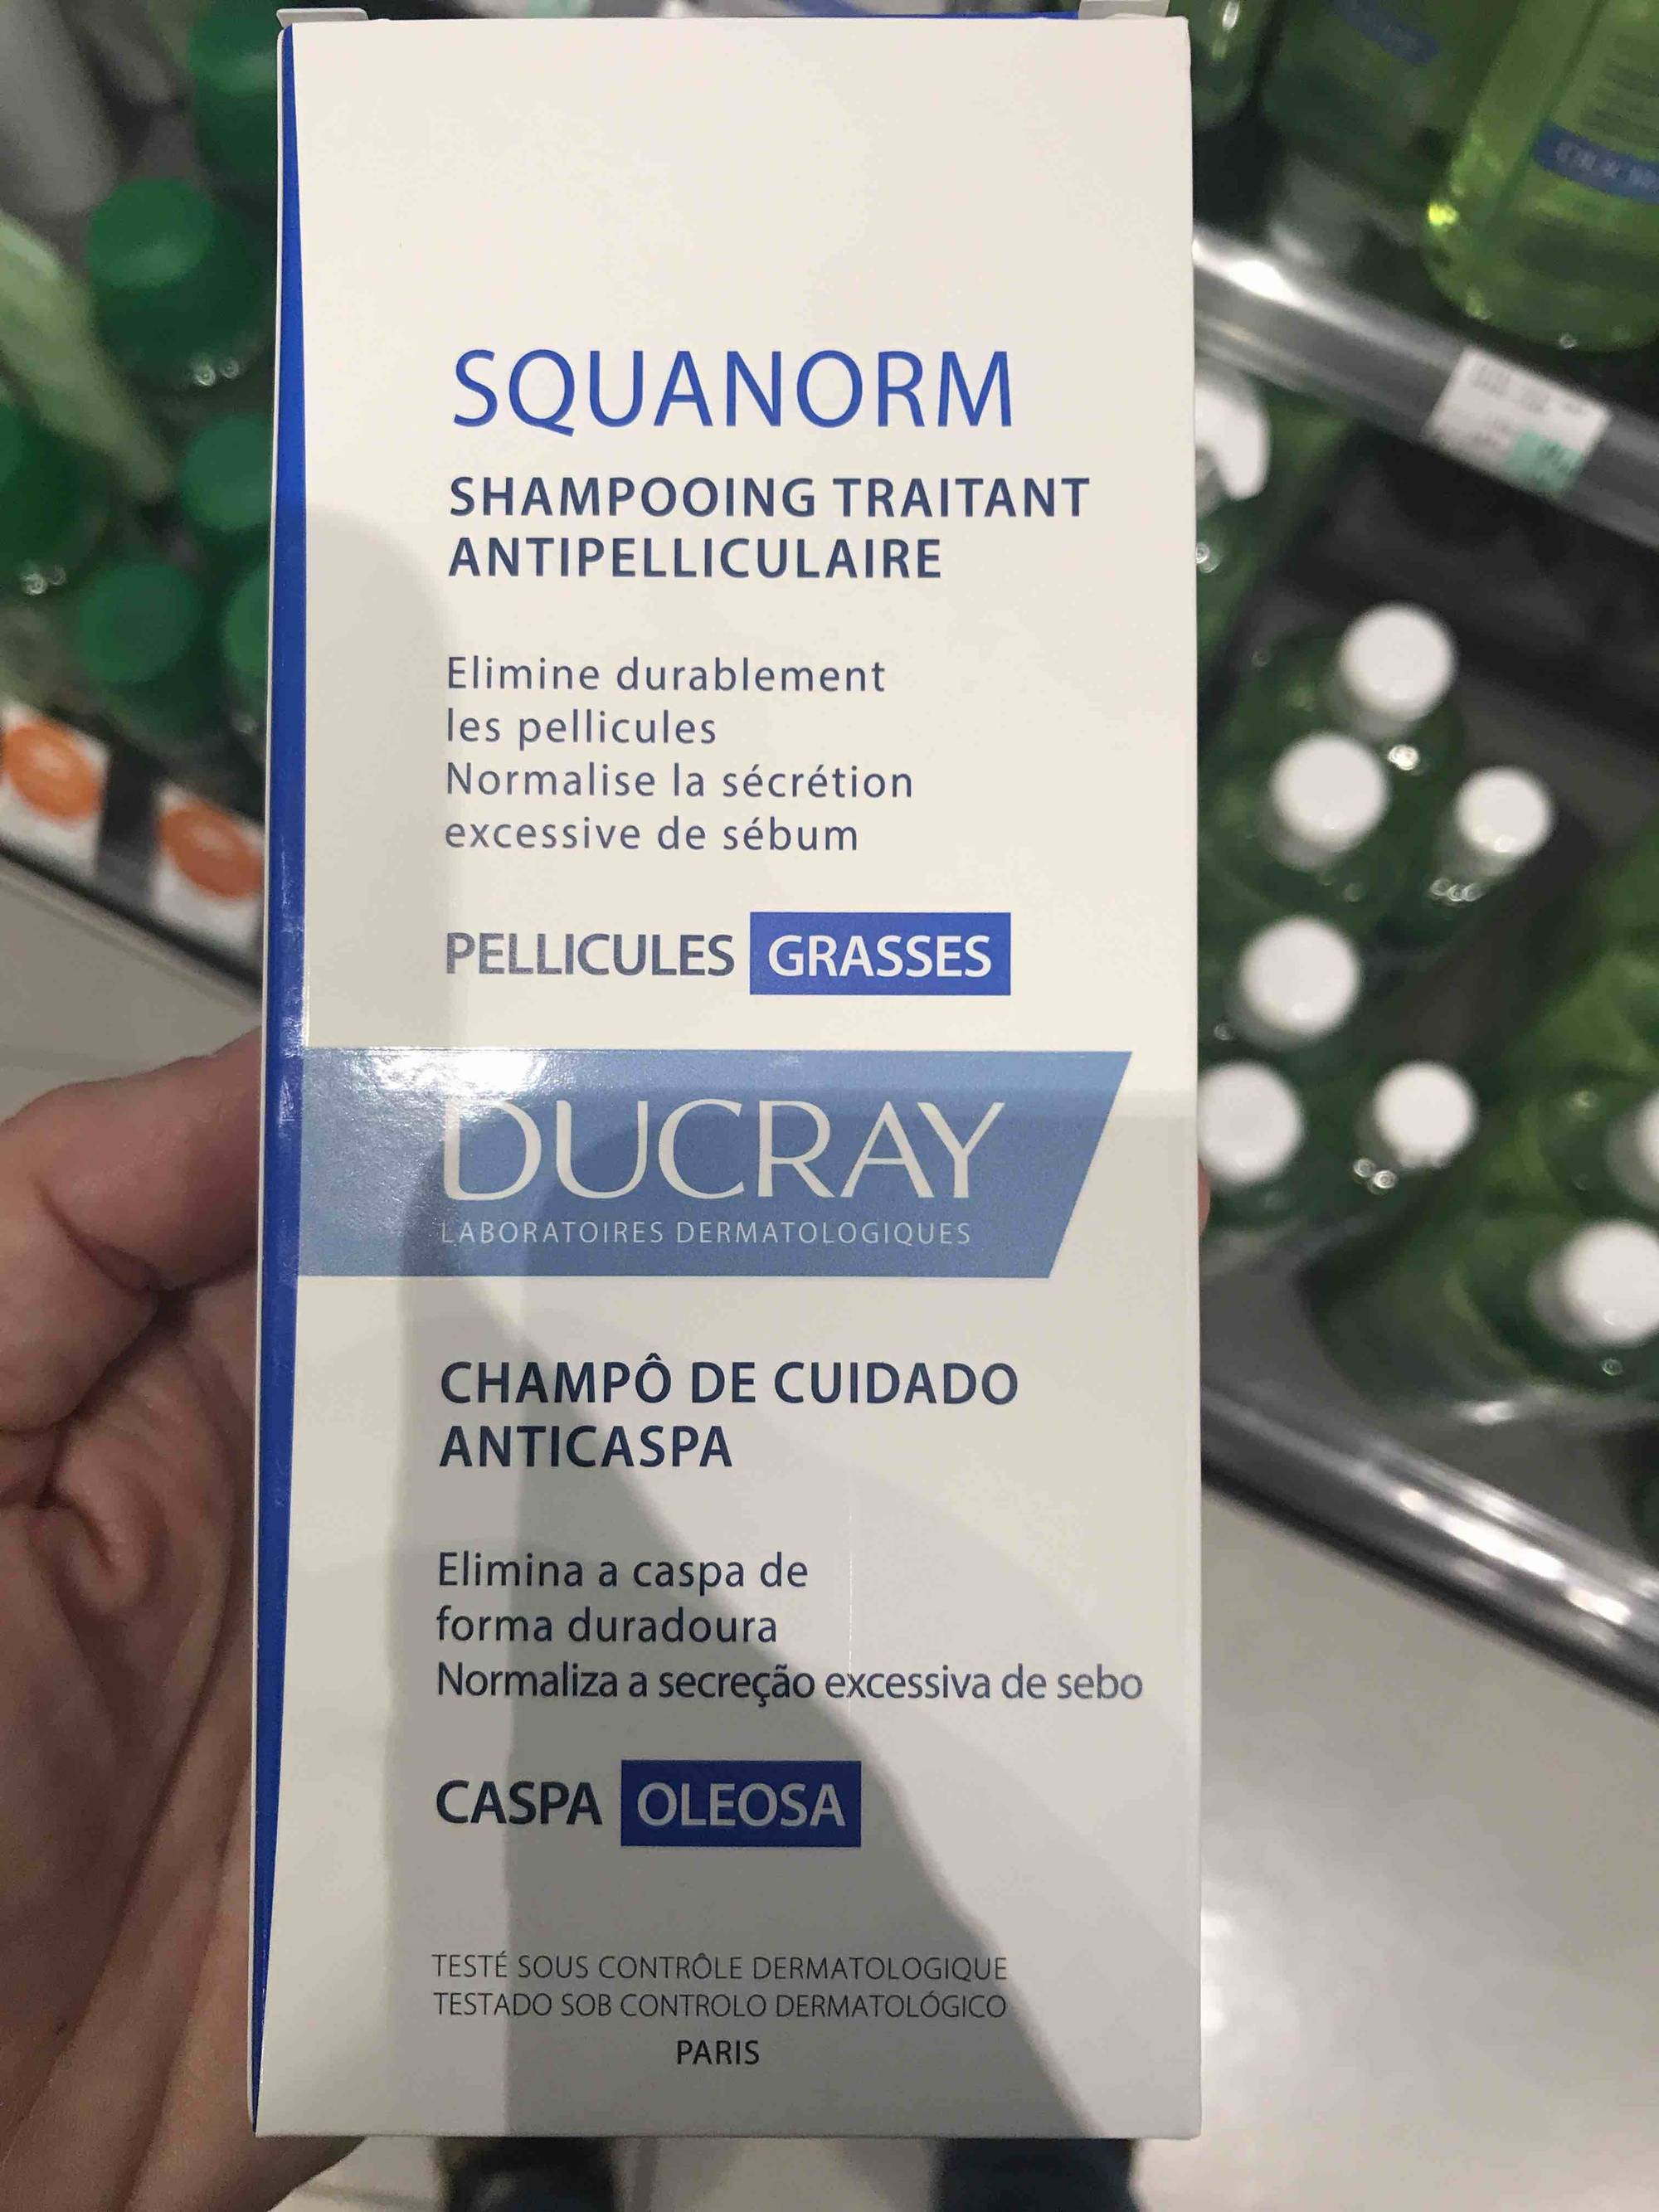 DUCRAY - Squanorm - Shampooing traitant antipelliculaire